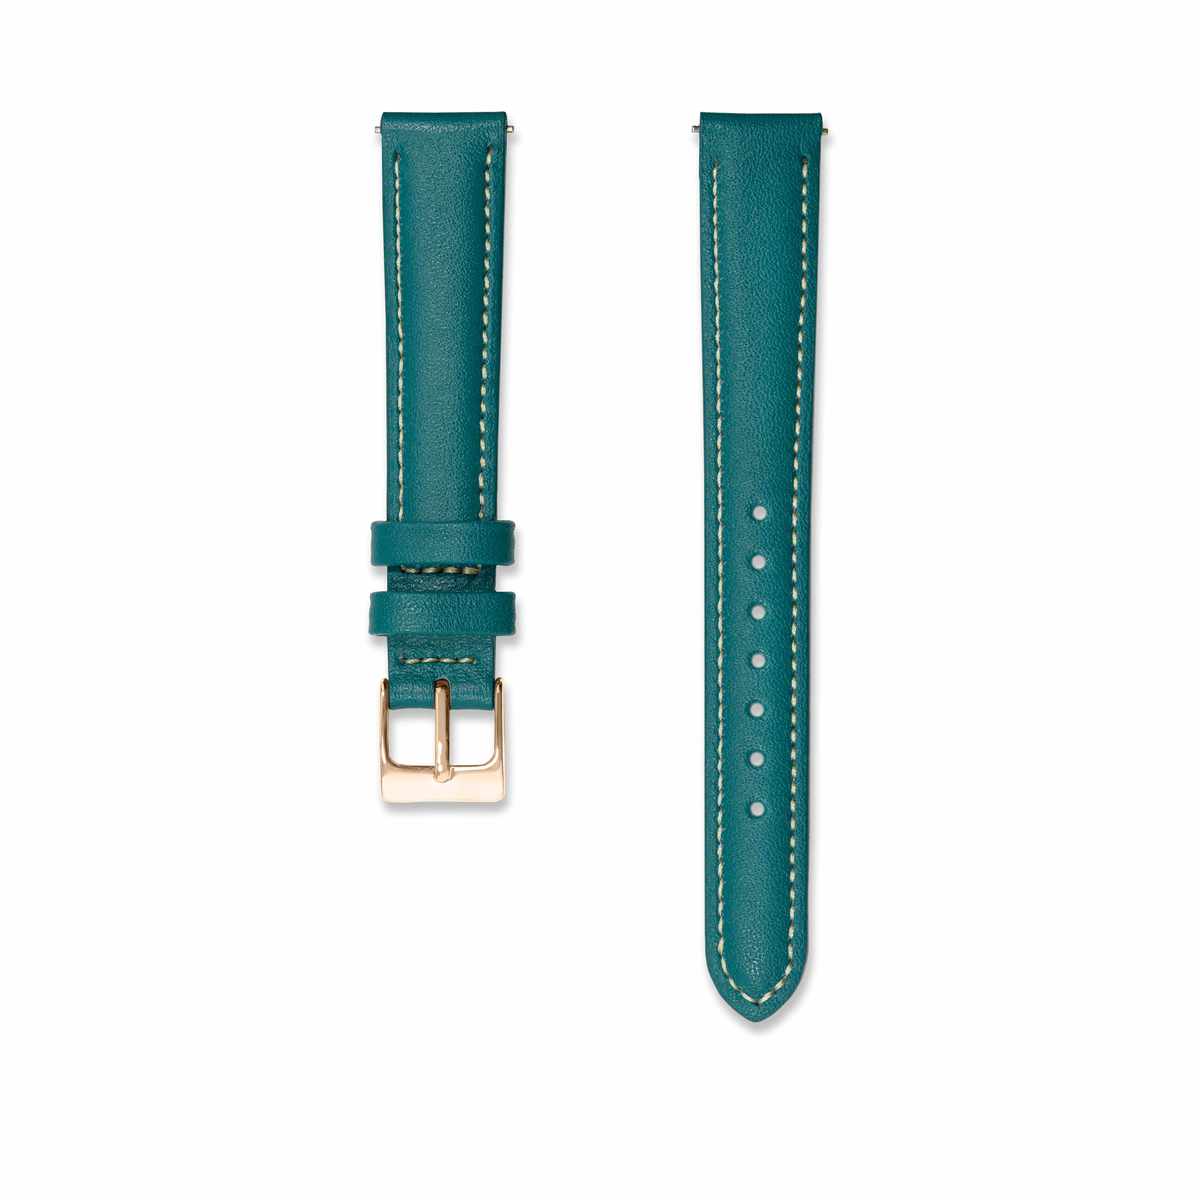 Peacock leather strap 14mm